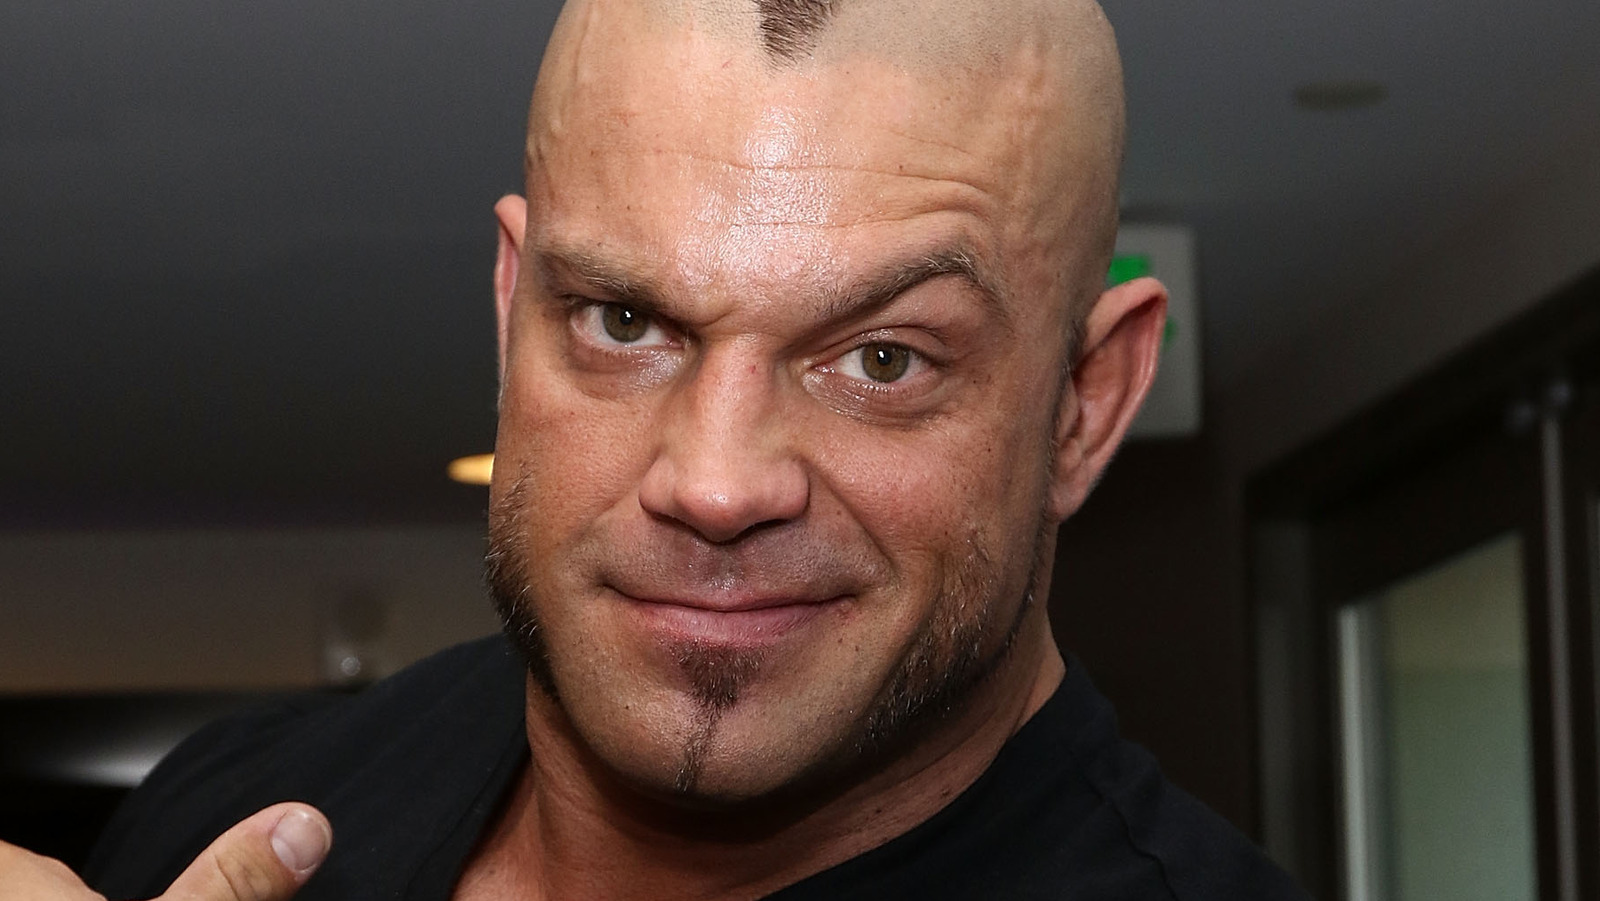 Big Update On Brian Cage's AEW Contract Status